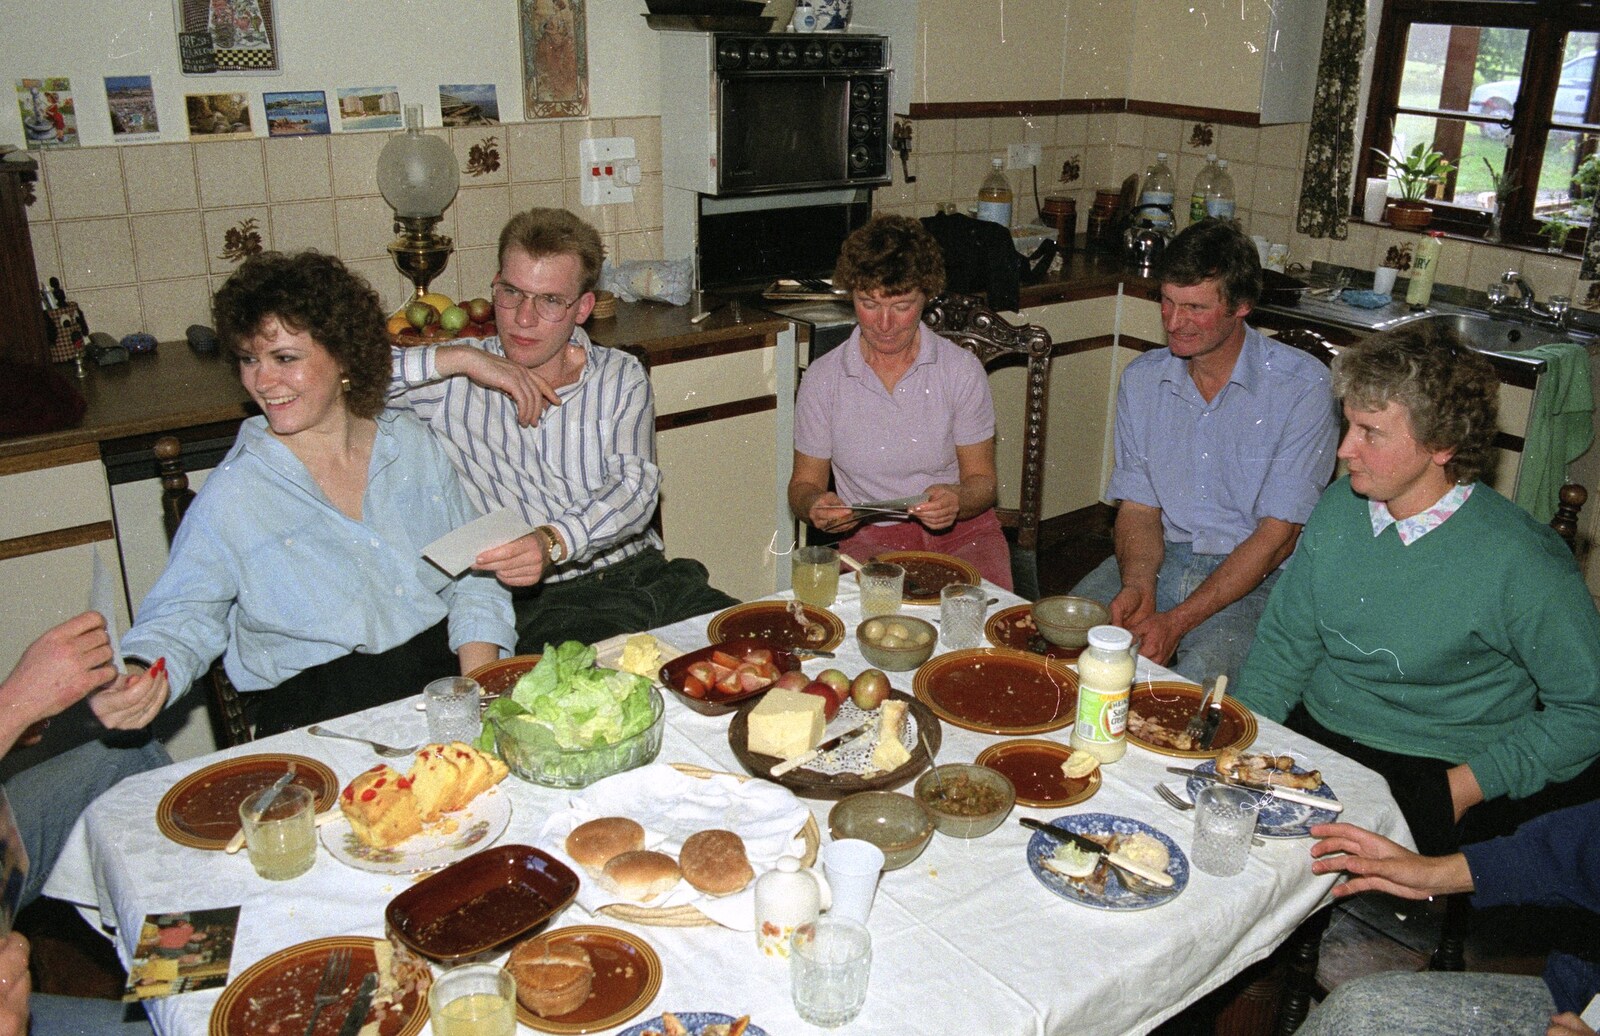 A ploughman's lunch from The Annual Cider Making Event, Stuston, Suffolk - 11th October 1990